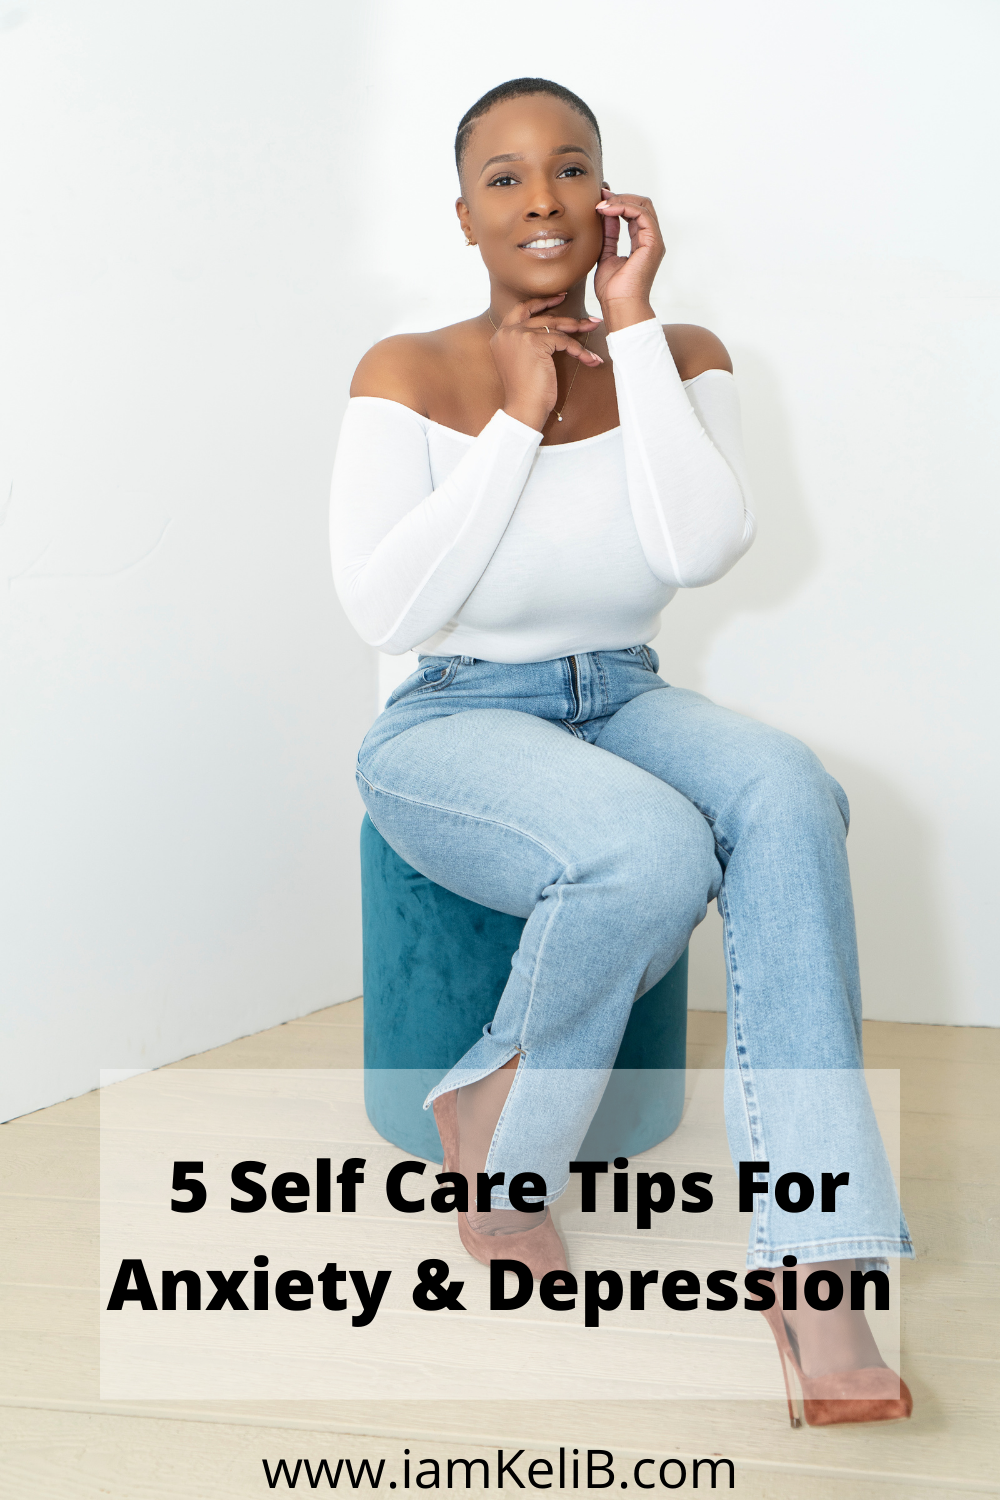 5 Self Care Tips For Anxiety & Depression